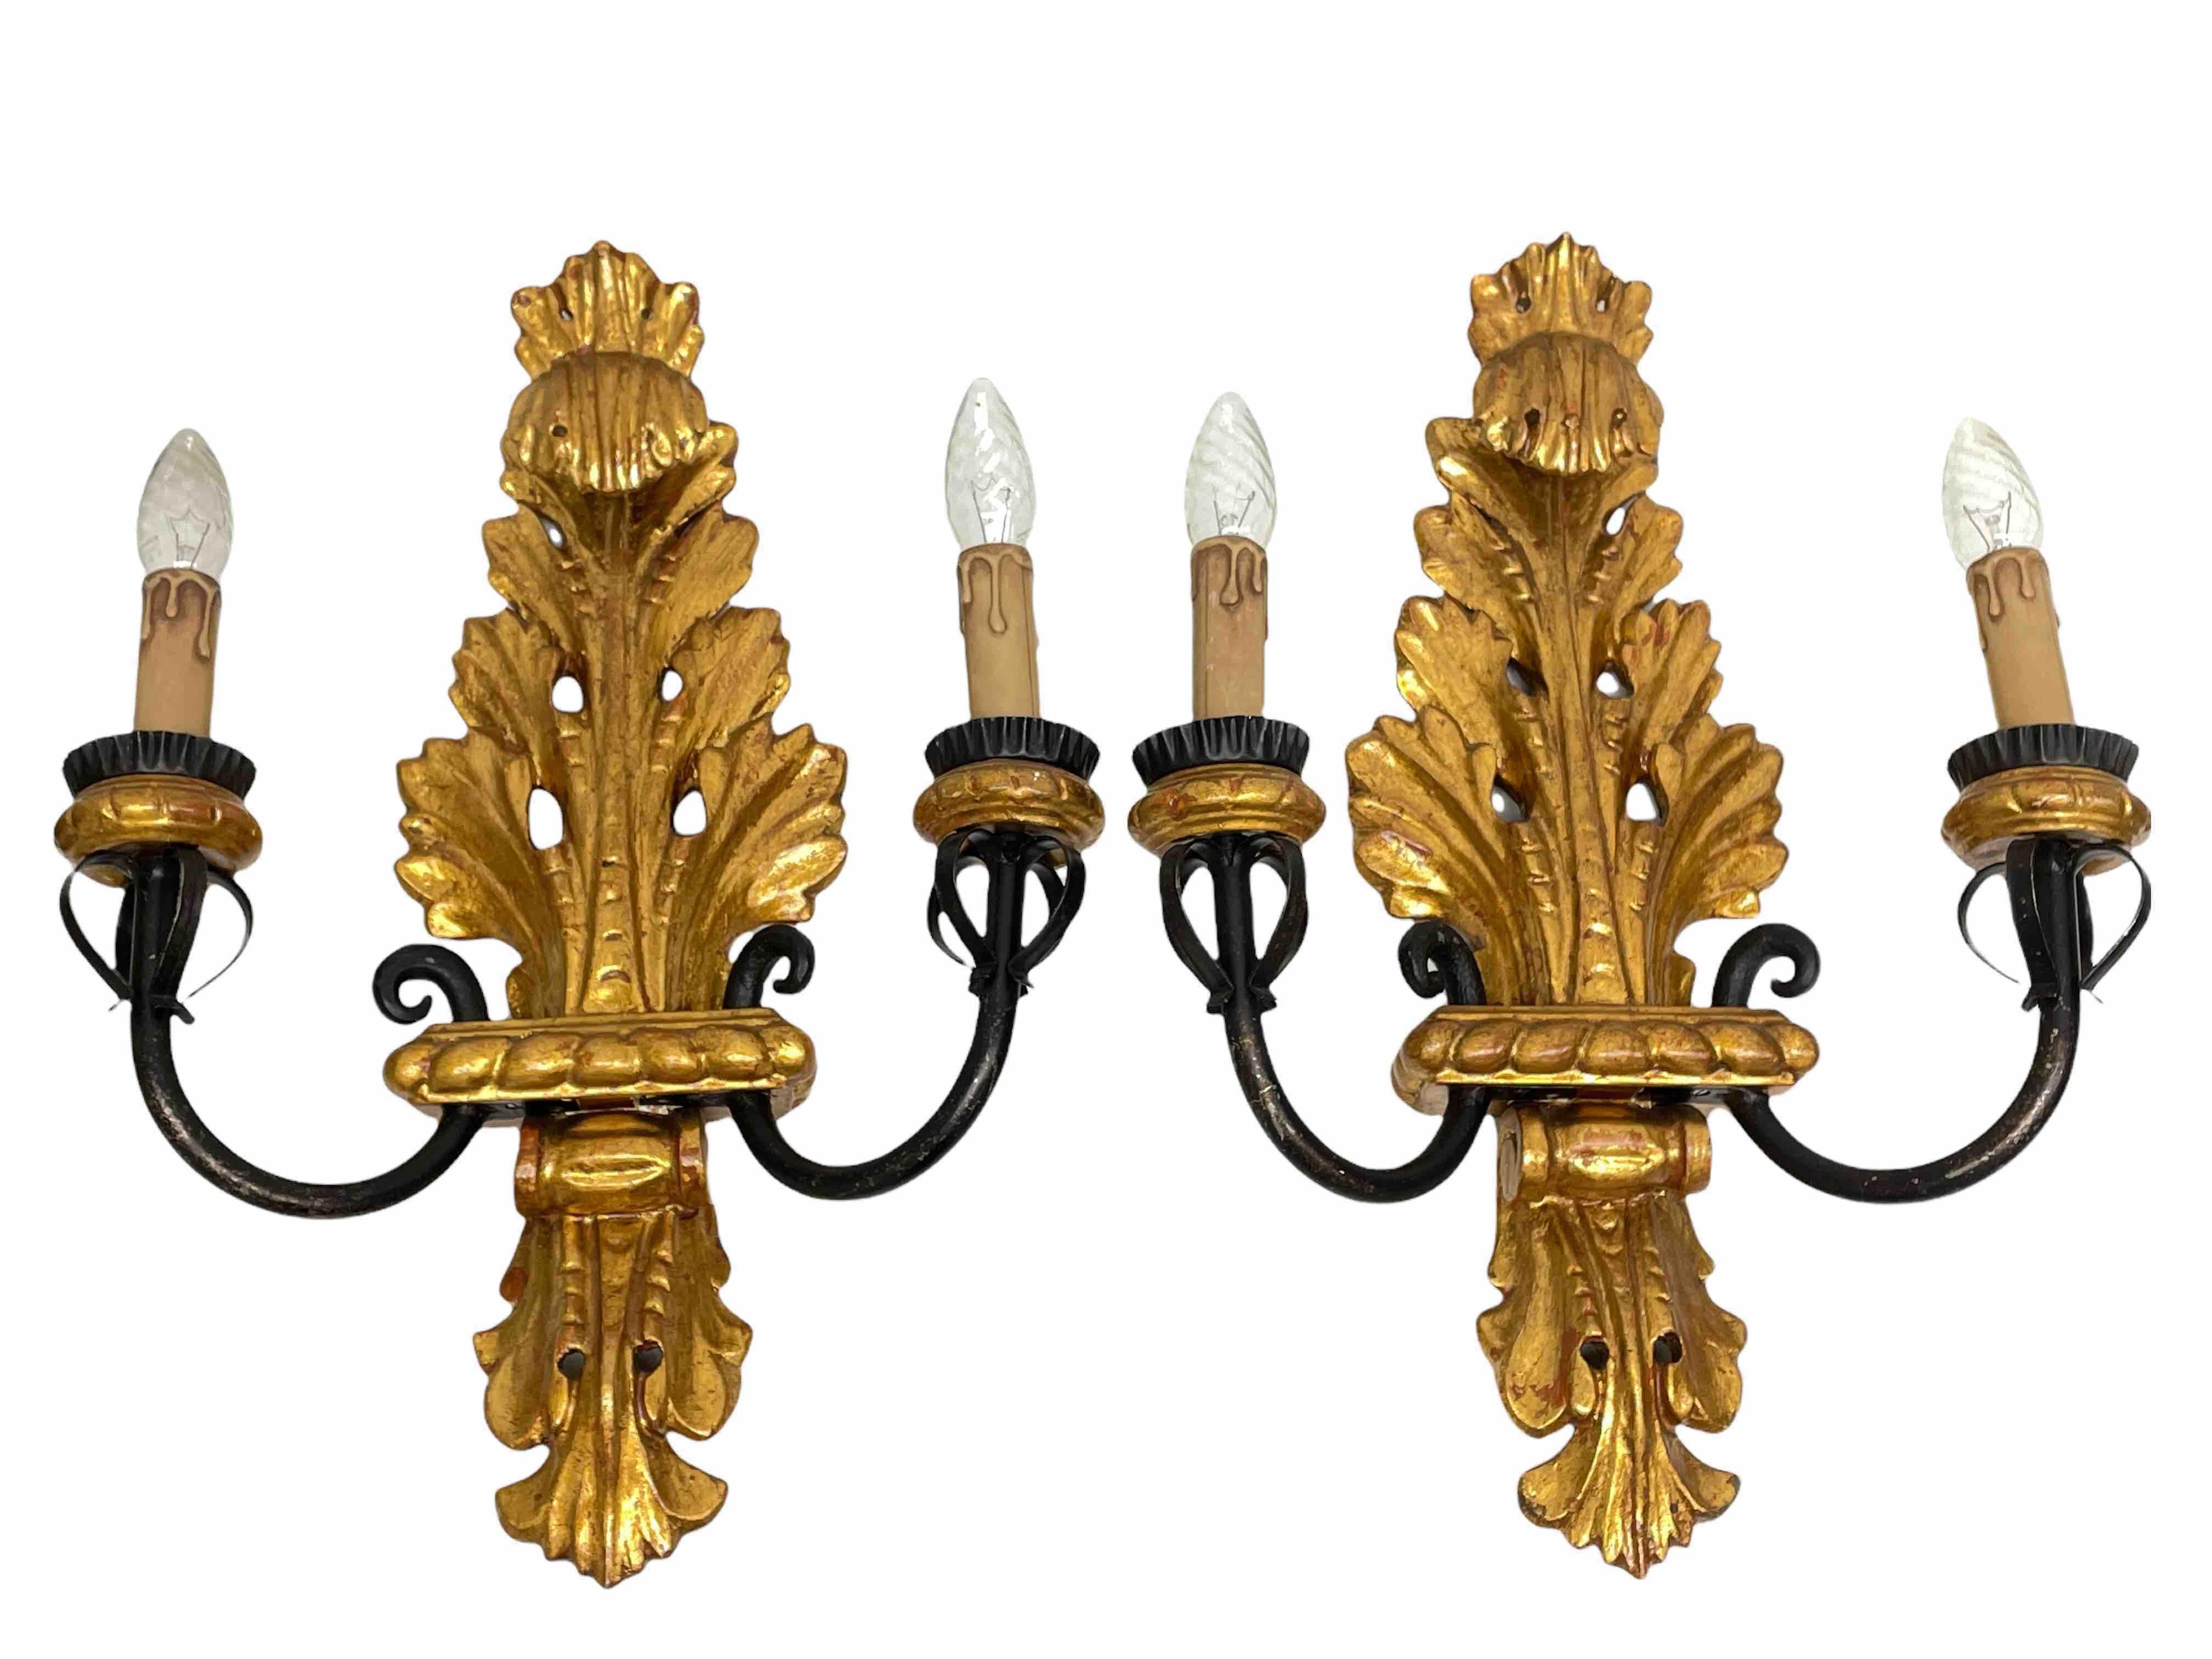 Hollywood Regency Set of Five Stunning Gilt Wood Tole Florentine Sconces by Banci, Italy, 1970s For Sale